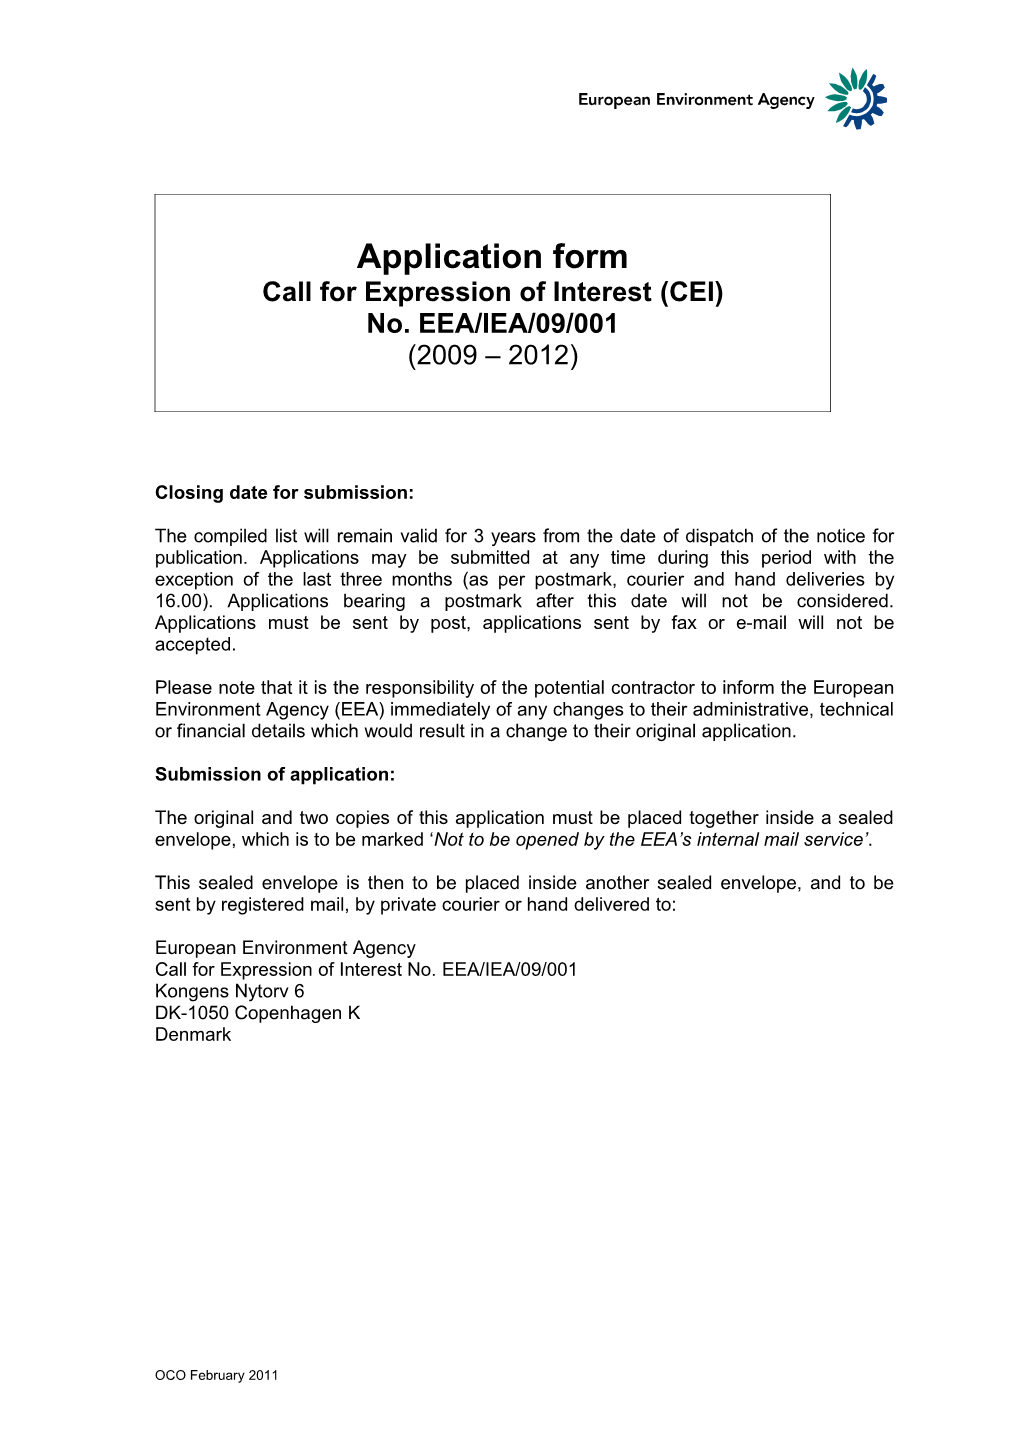 Call for Expressions of Interest - Application Form